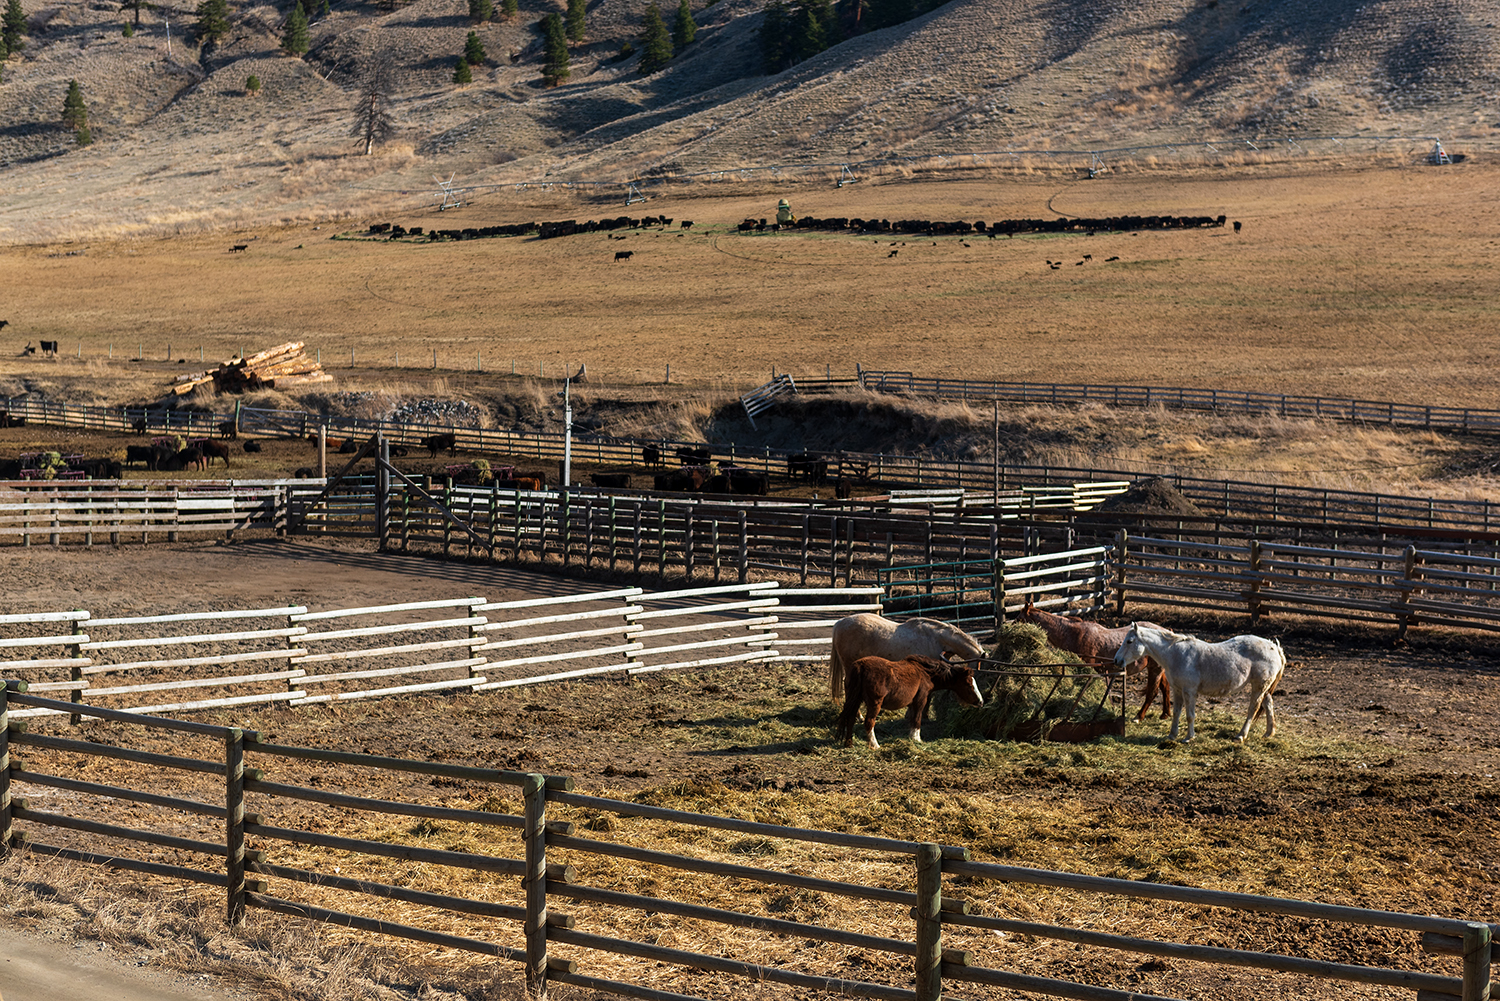 Kamloops rural life ranch with ponies and fences in a circle